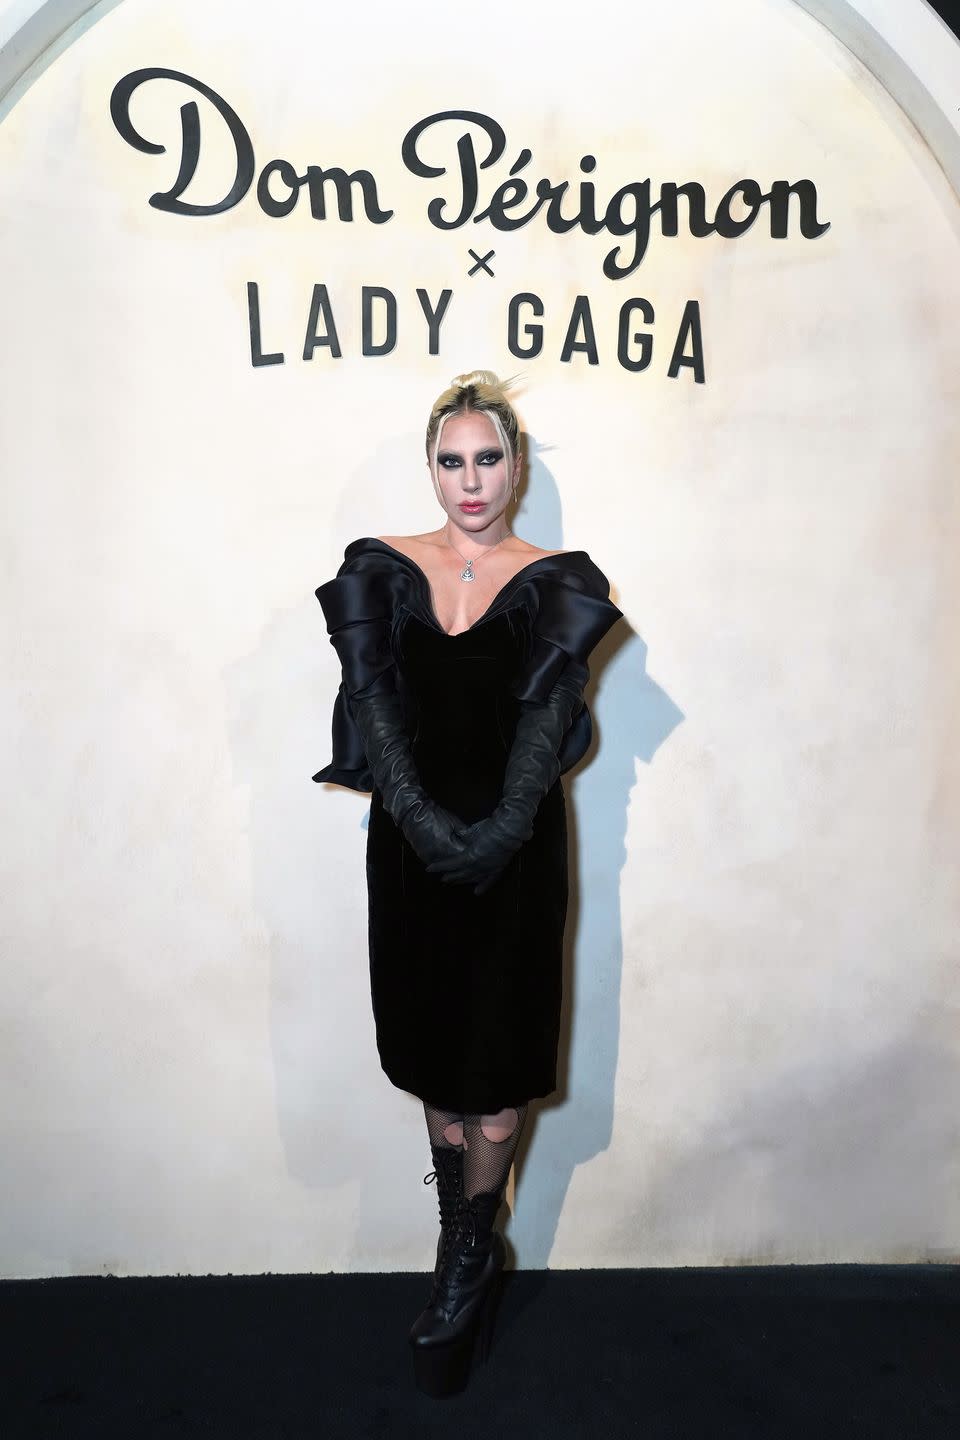 los angeles, california   october 20 lady gaga is seen as dom pérignon and lady gaga pursue their creative dialogue at sheats goldstein residence on october 20, 2022 in los angeles, california photo by kevin mazurgetty images for dom pérignon